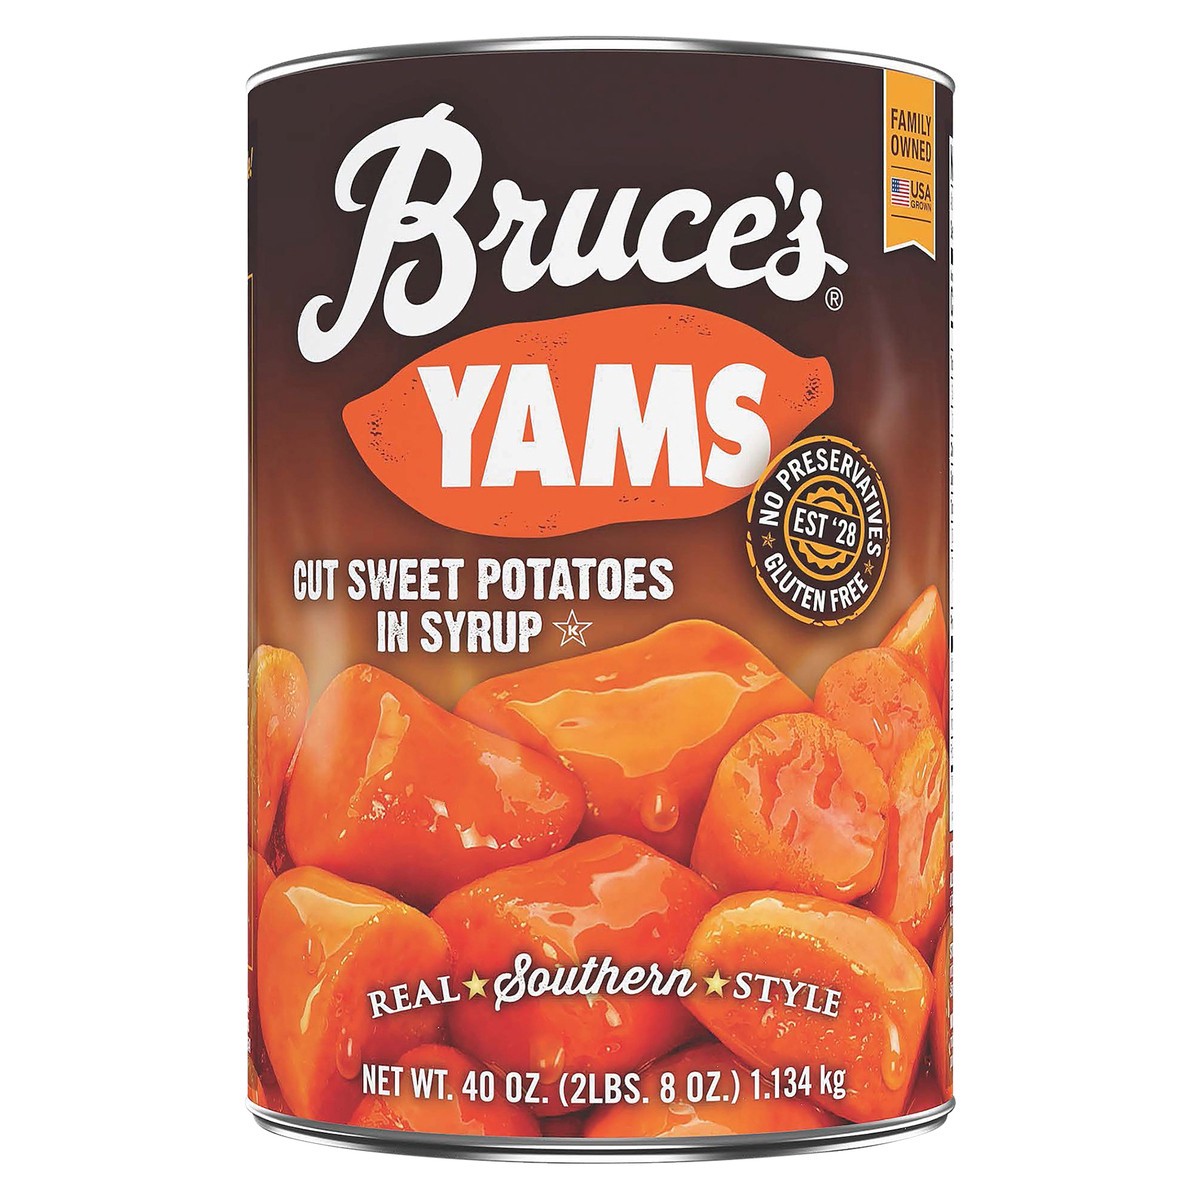 slide 4 of 10, Bruce's Yams Cut Sweet Potatoes in Syrup, 40 oz